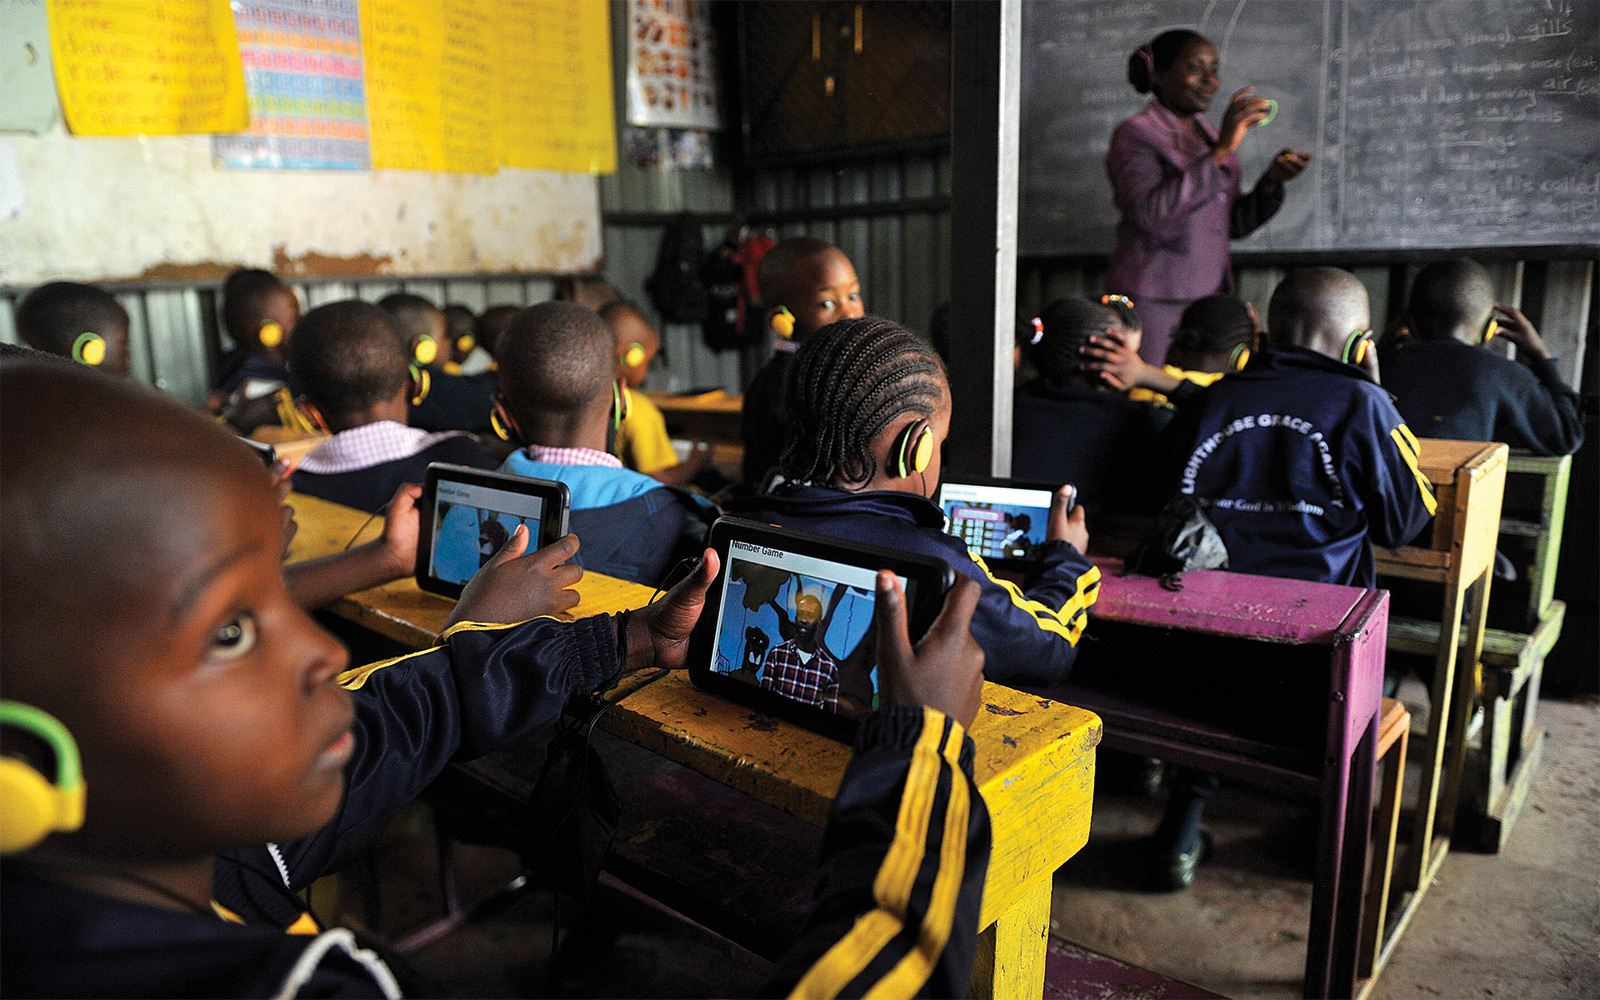 A Kenyan startup called BRCK, a technology company that offers low-cost internet connectivity, has partnered with schools to give students access to technology in the classroom. Altman says that BRCK is a startup worth watching.